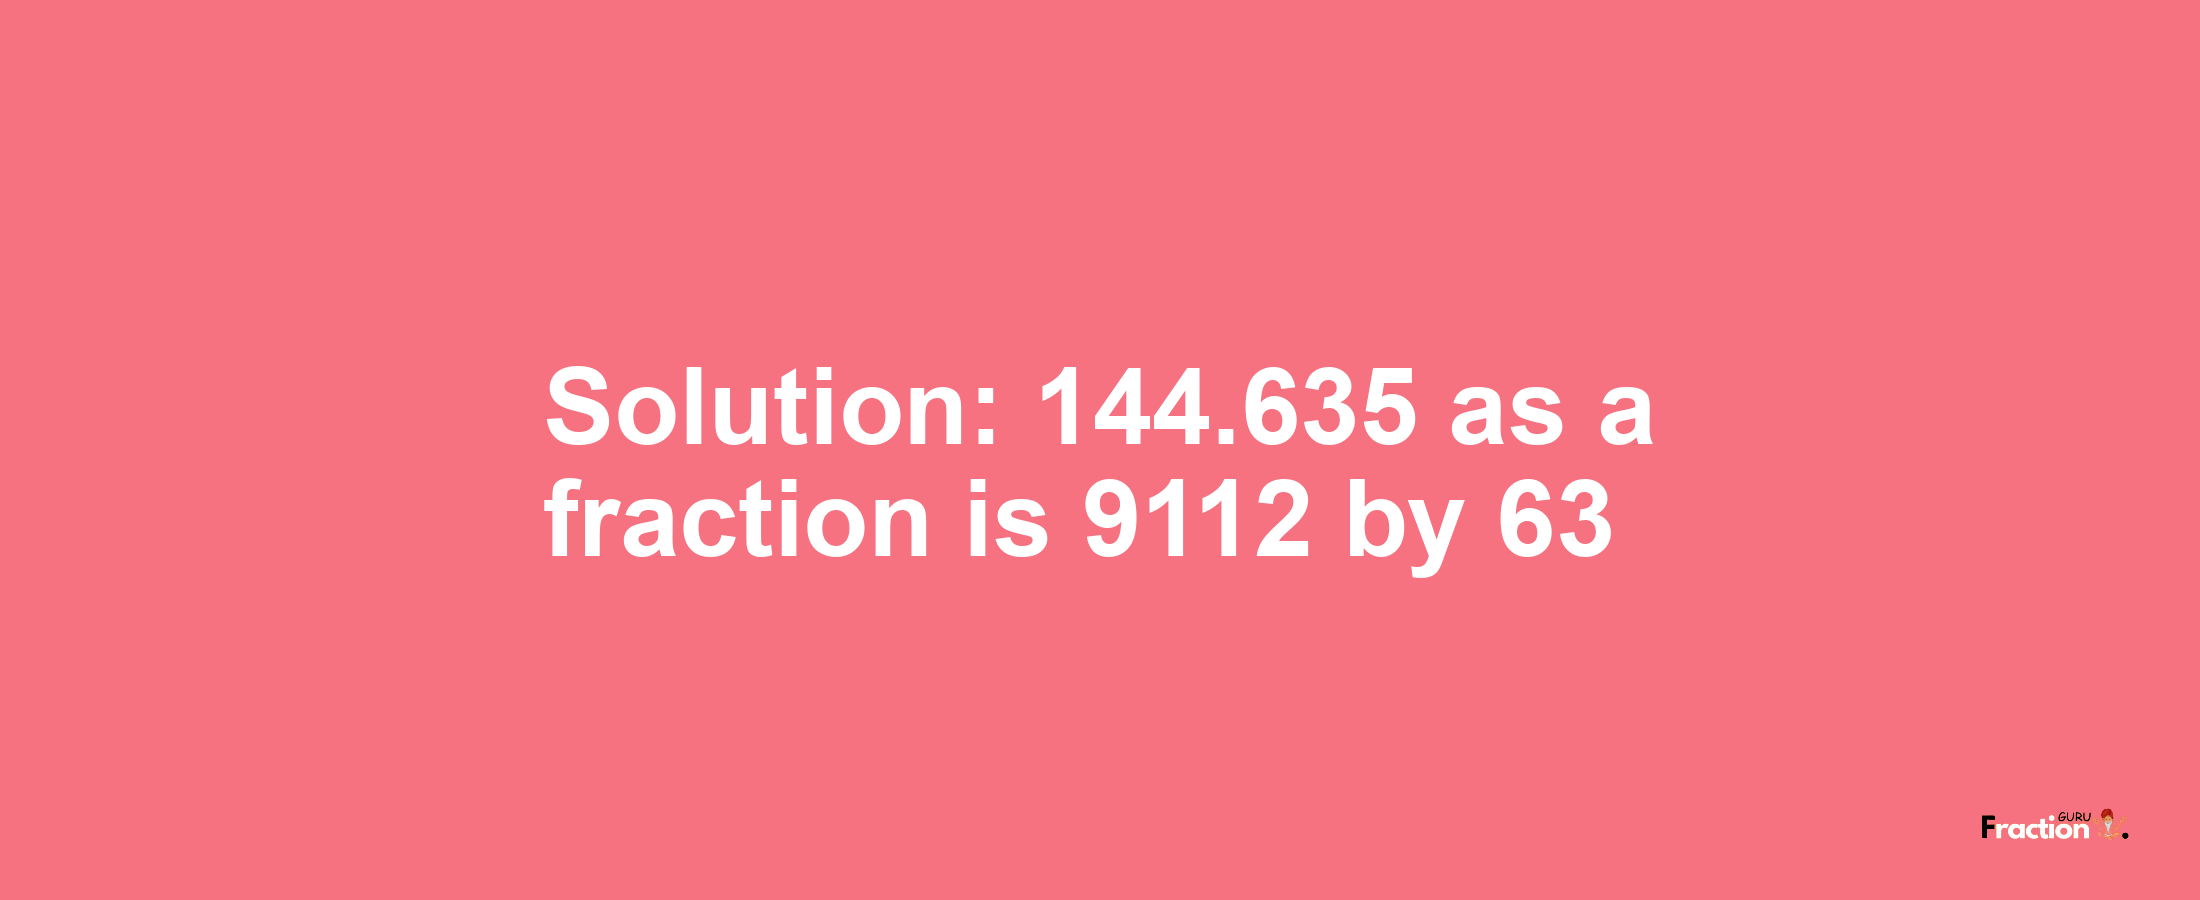 Solution:144.635 as a fraction is 9112/63